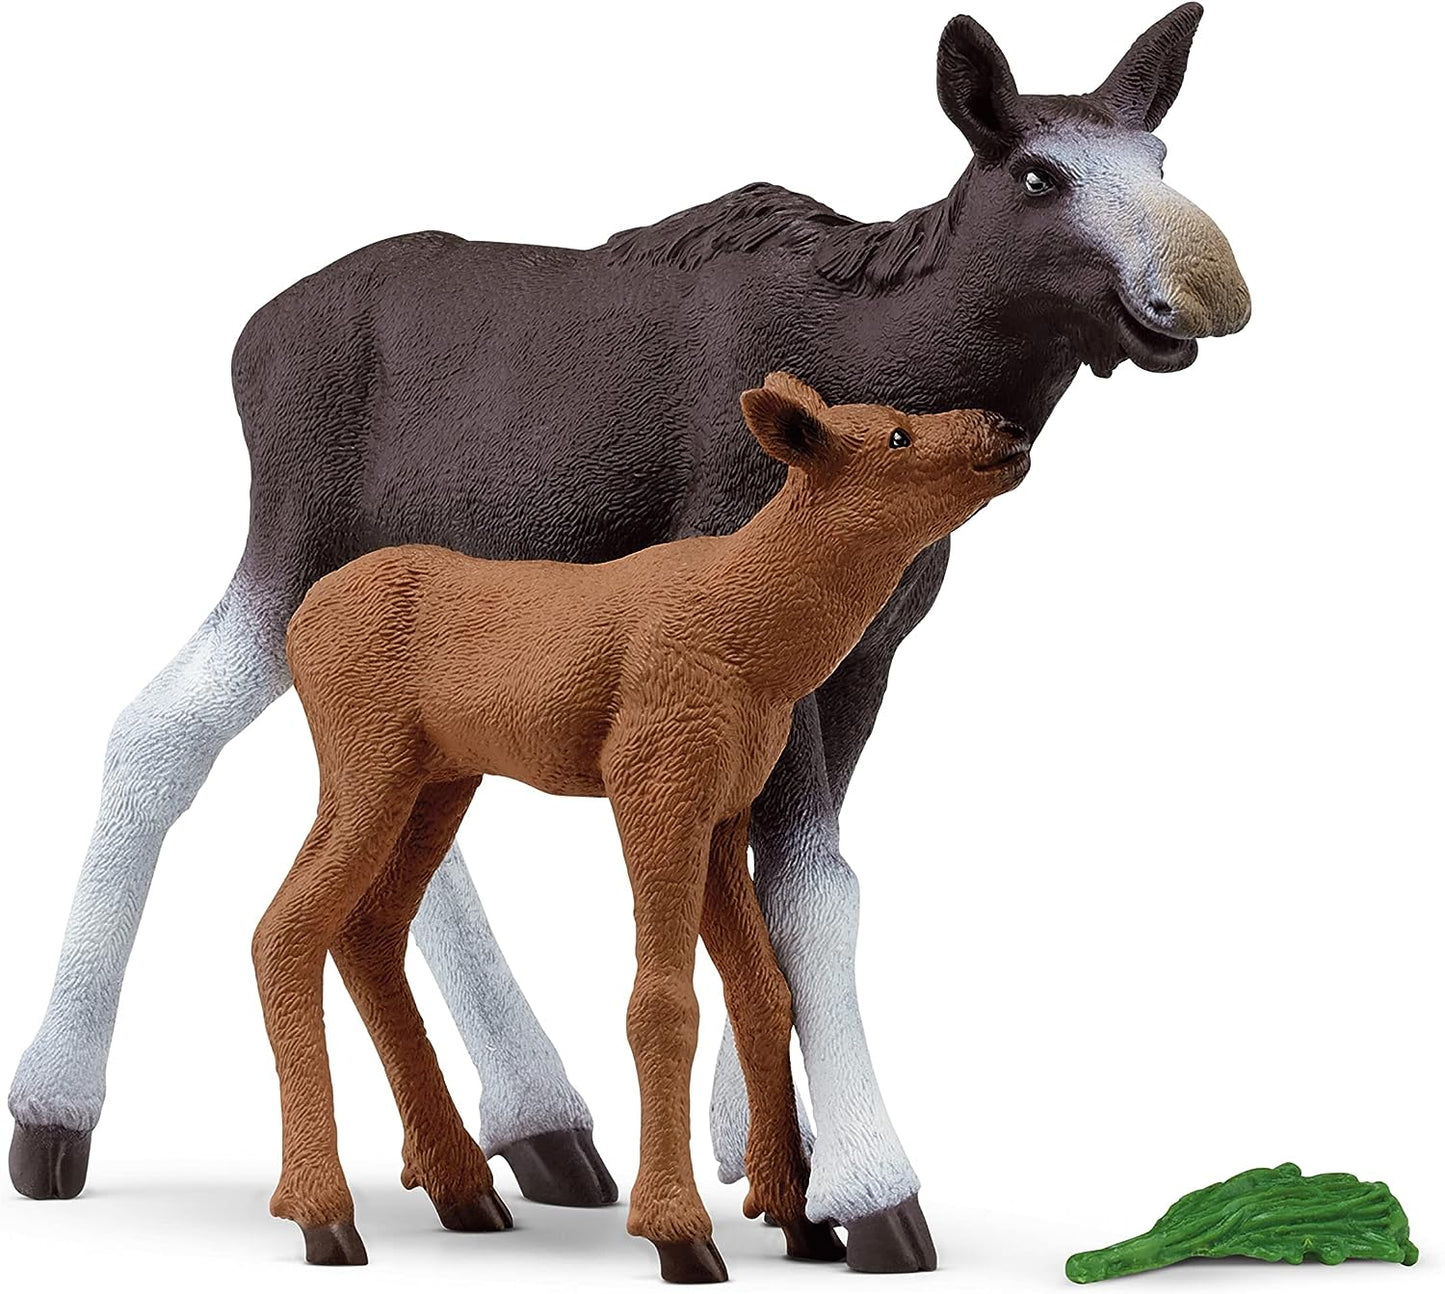 Wild Life 42629 Moose Family with Mother and Baby Moose Schleich 54058